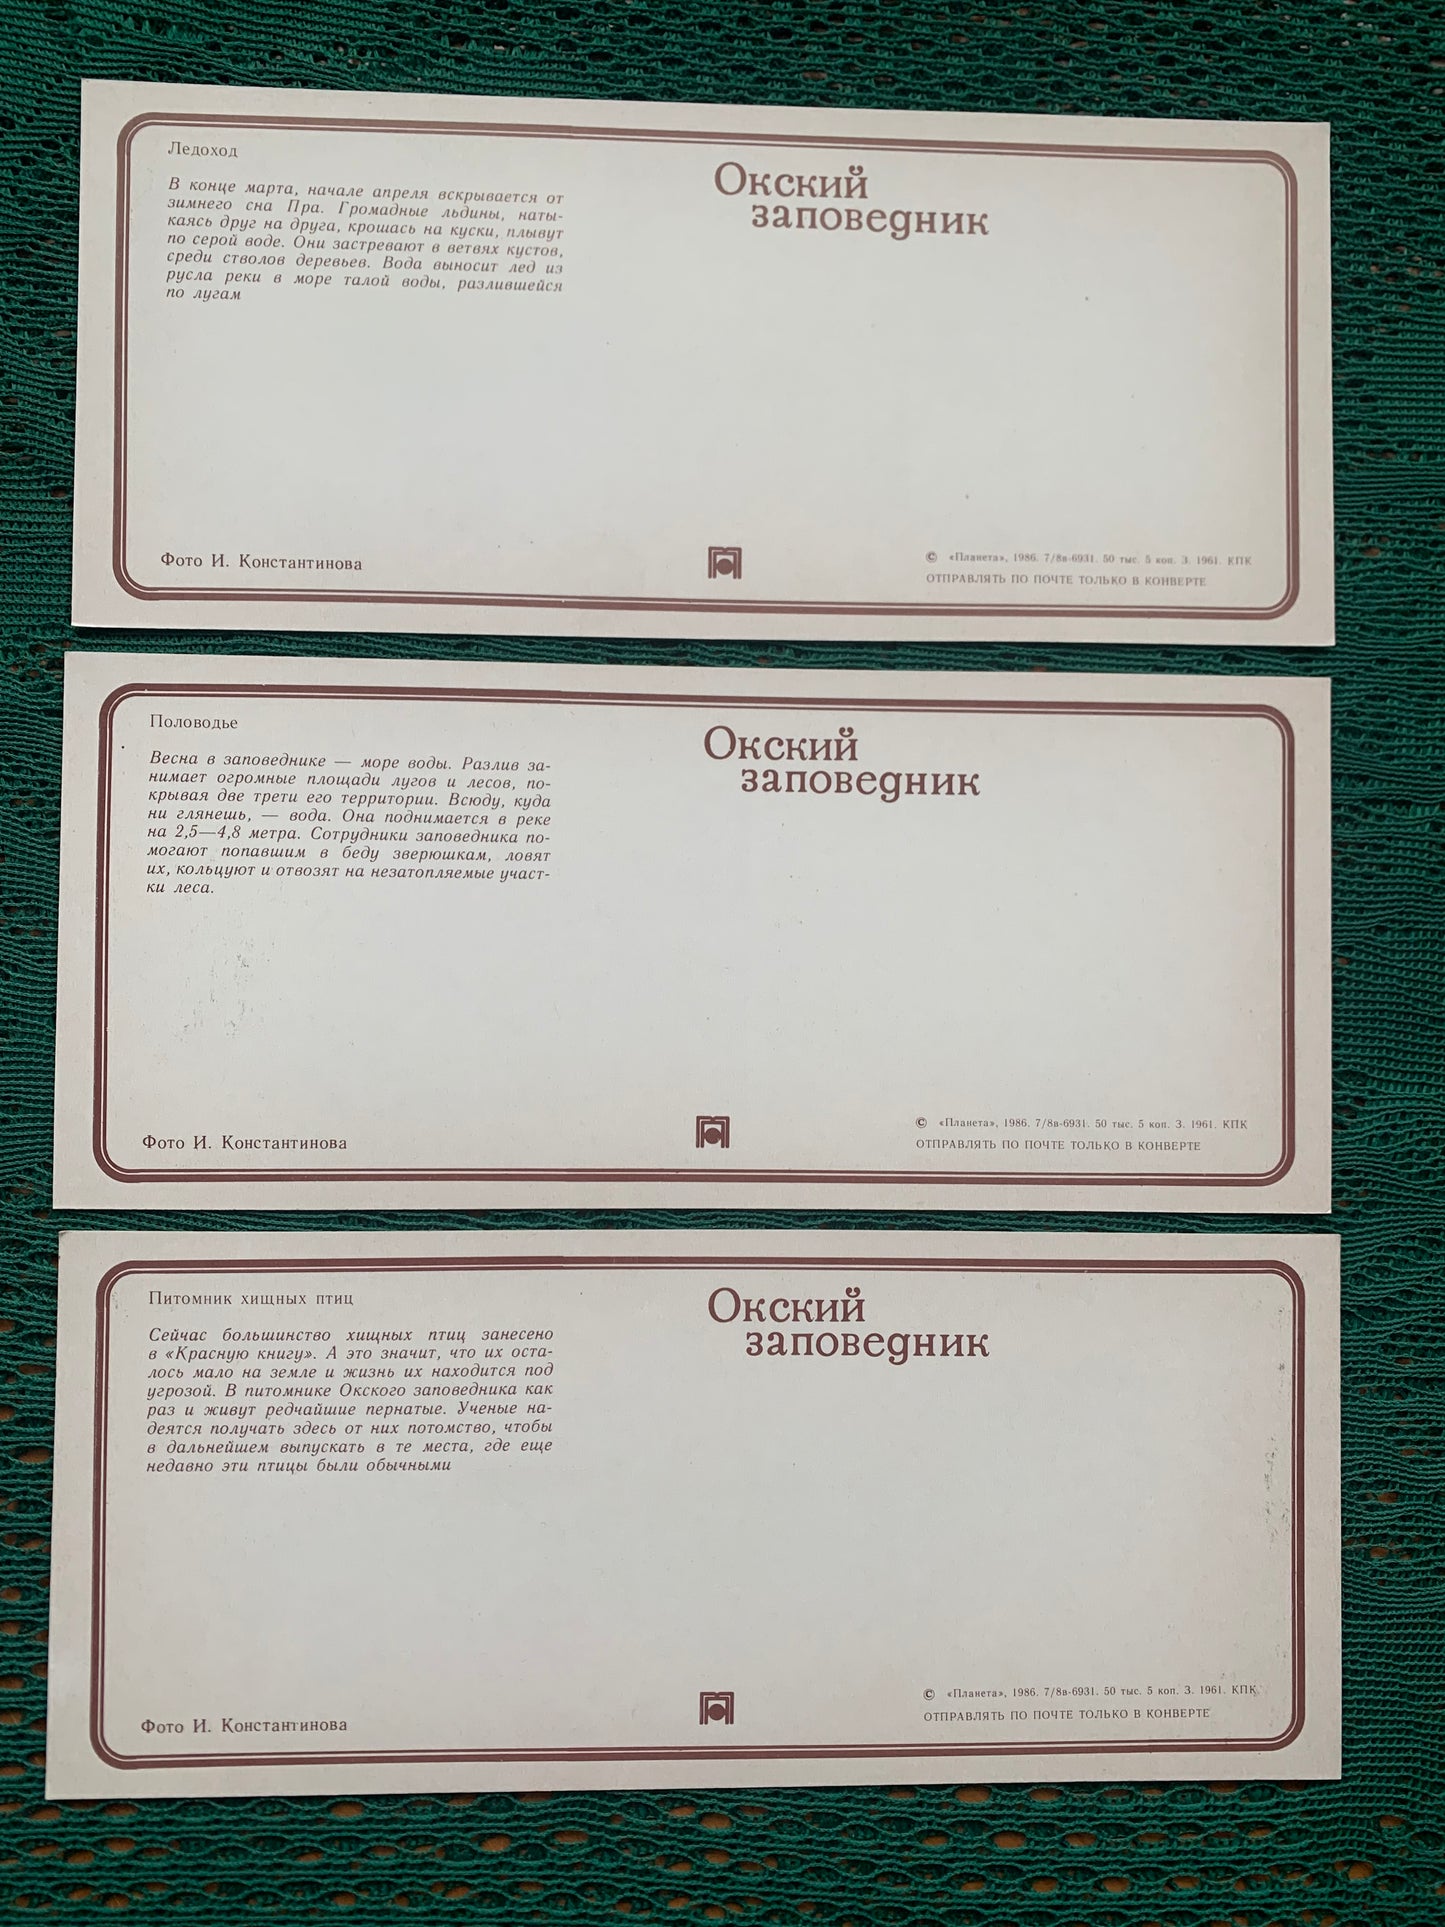 Soviet-time postcard set for collecting - Oka Nature Reserve in Russia - 1986 - unused 14 postcards